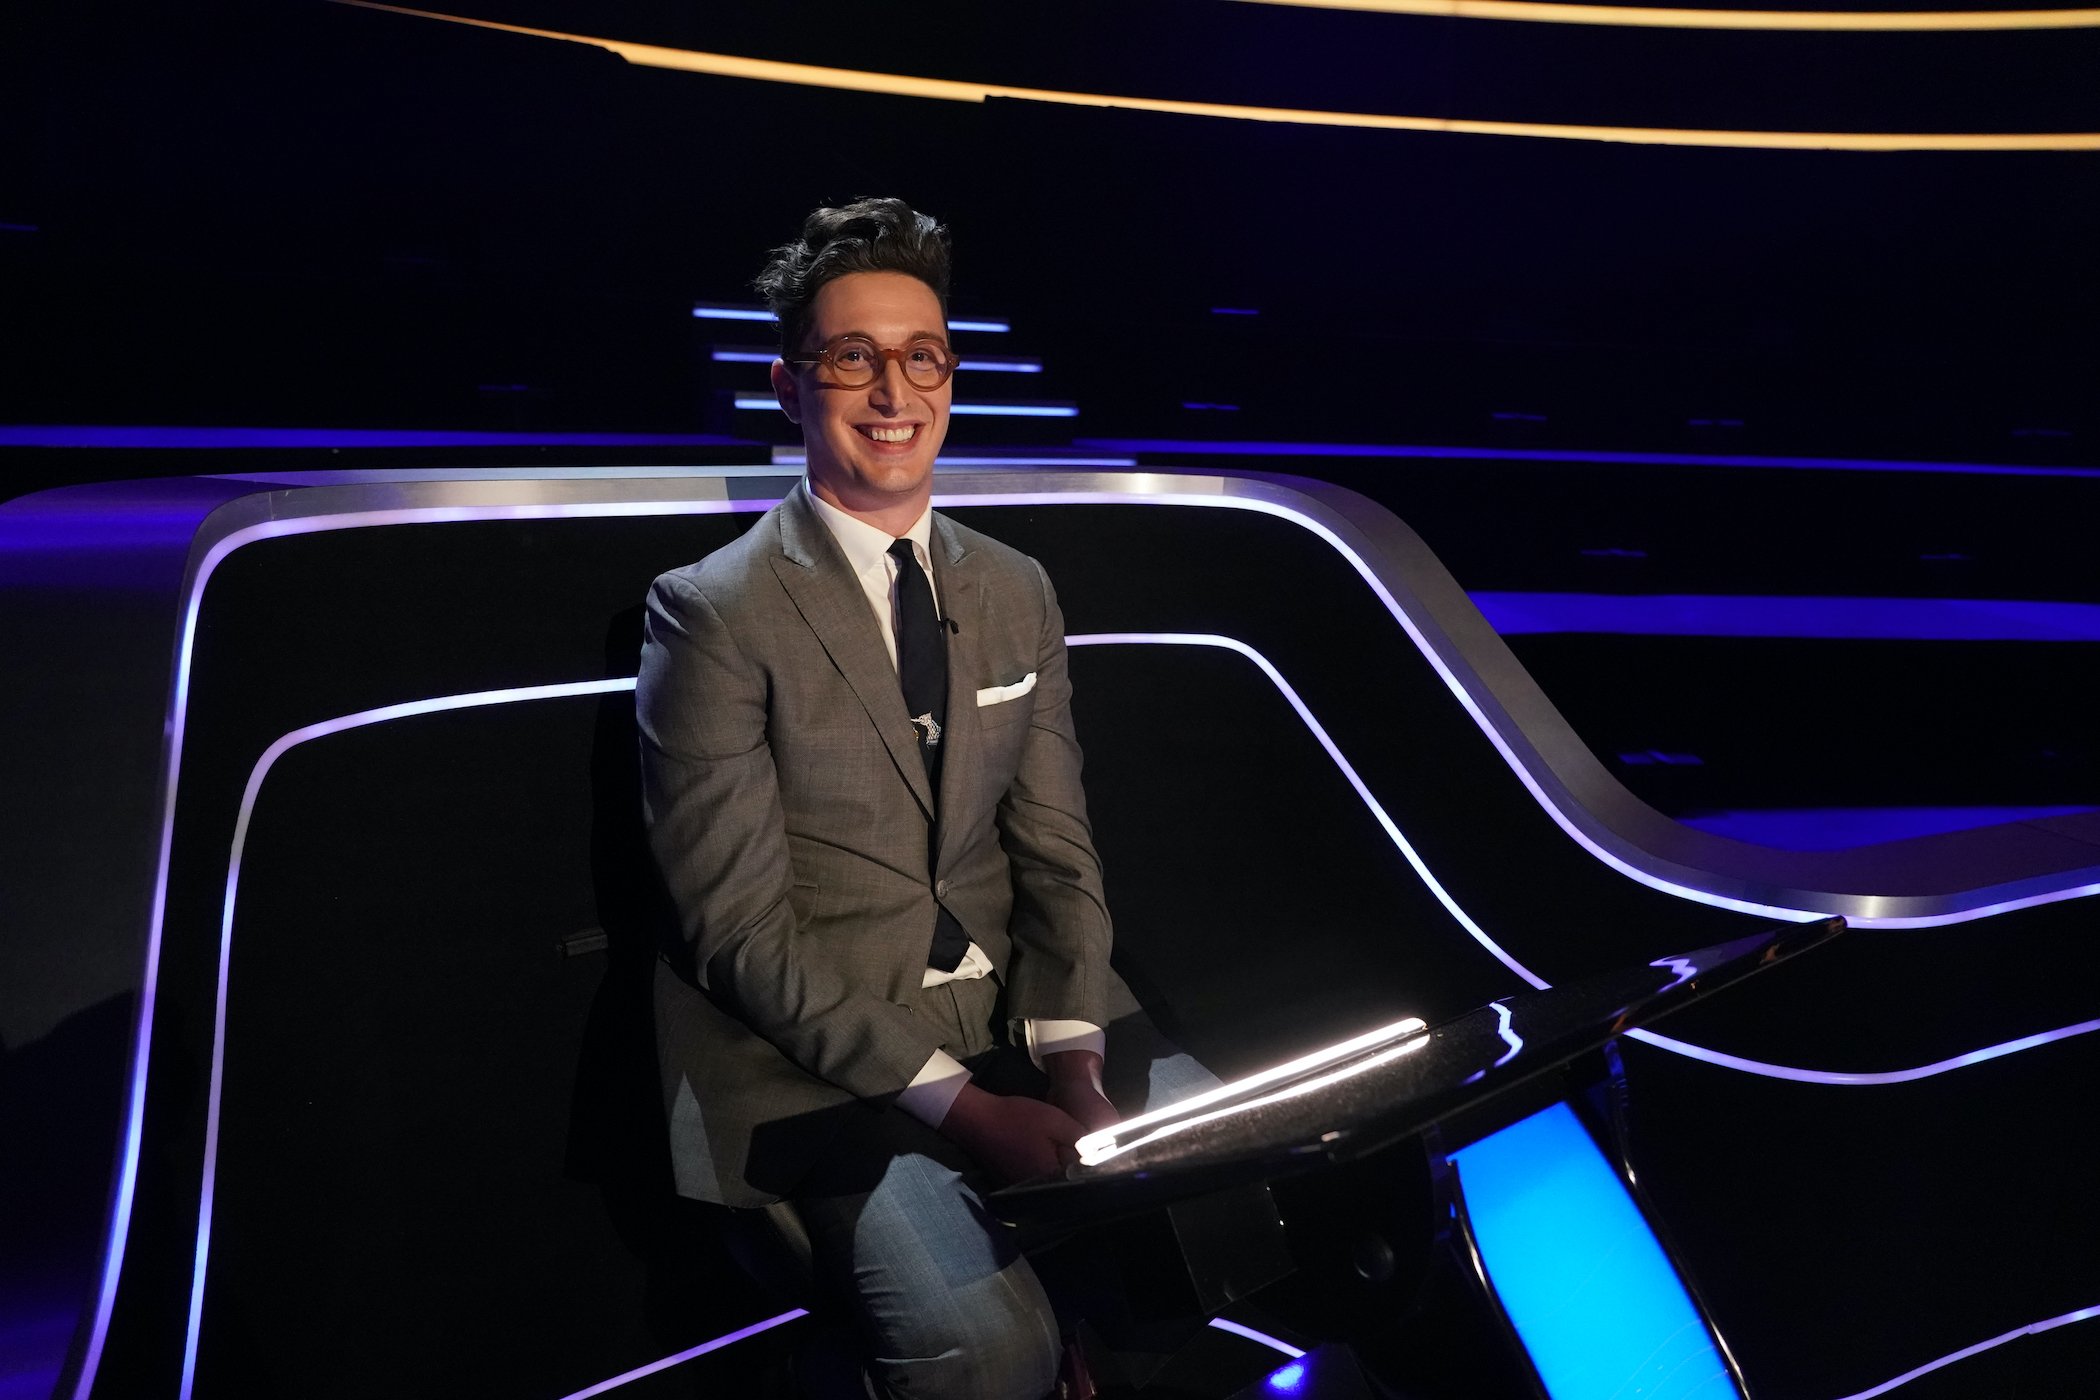 Buzzy Cohen smiles on the set of 'Who Wants To Be A Millionaire?' in 2020